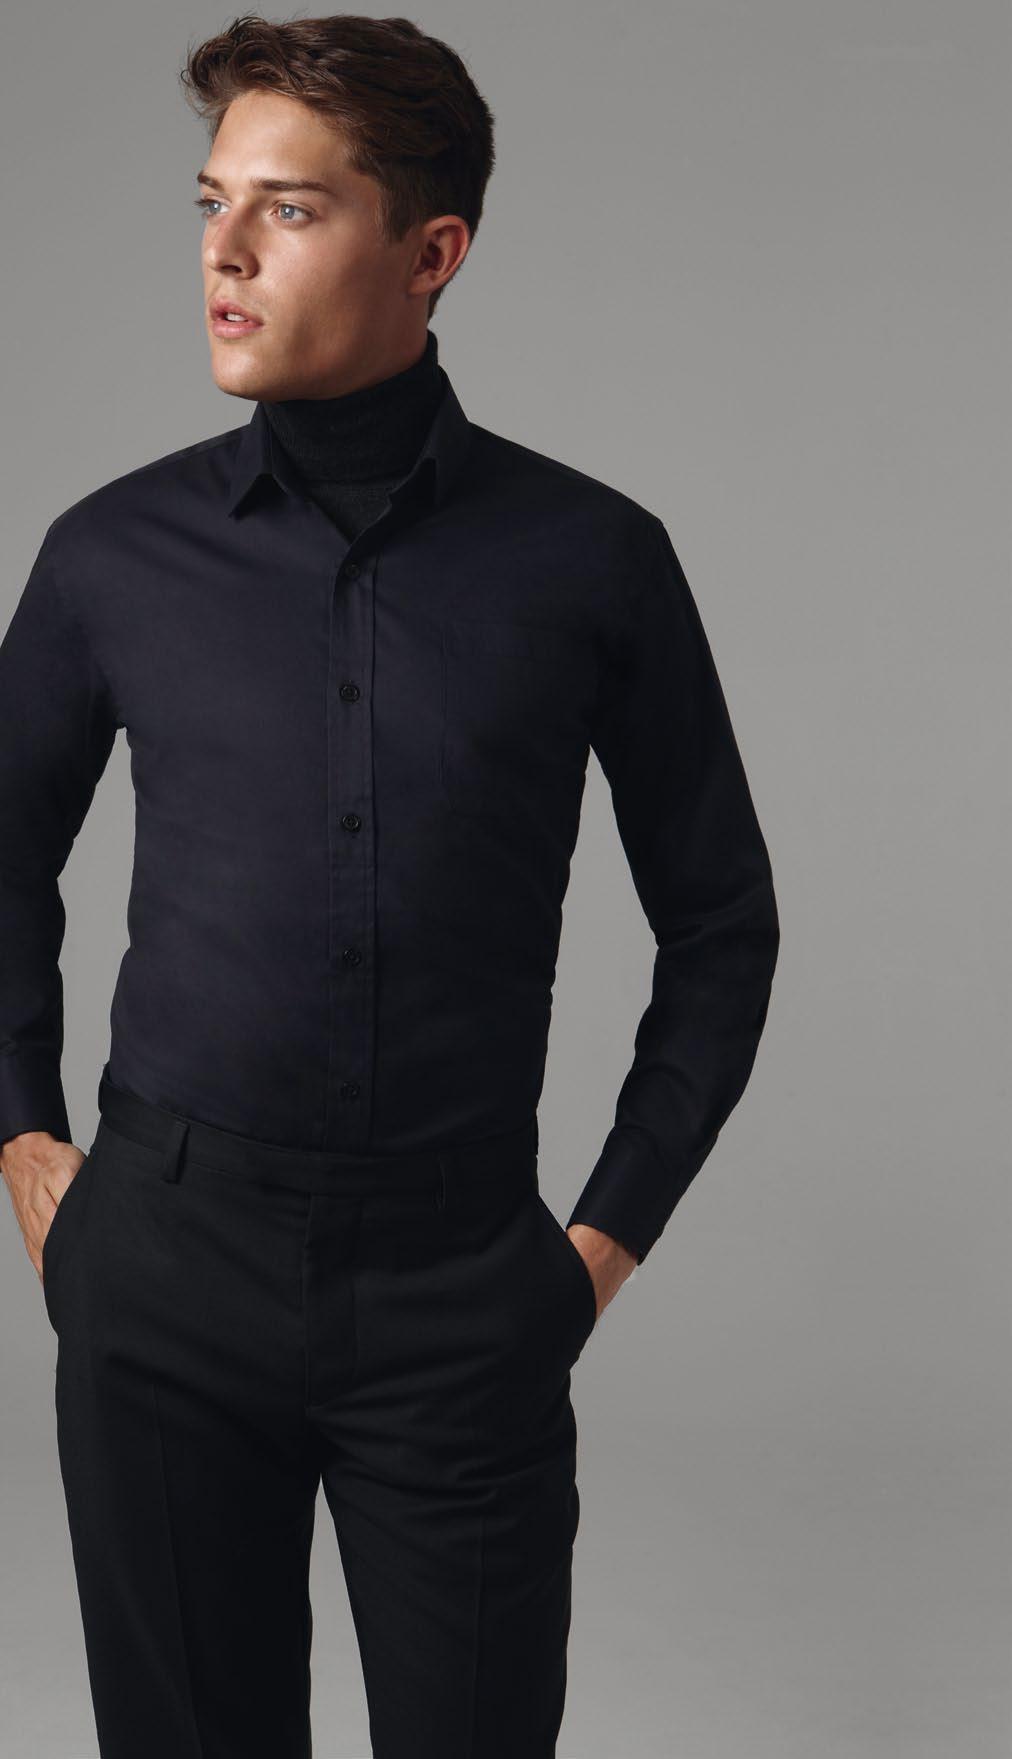 Look sharp - Feel sharp - Work sharp sharp The 00% cotton composition of the B&C Sharp shirt does not compromise its durability - its secret: a twill fabric construction.